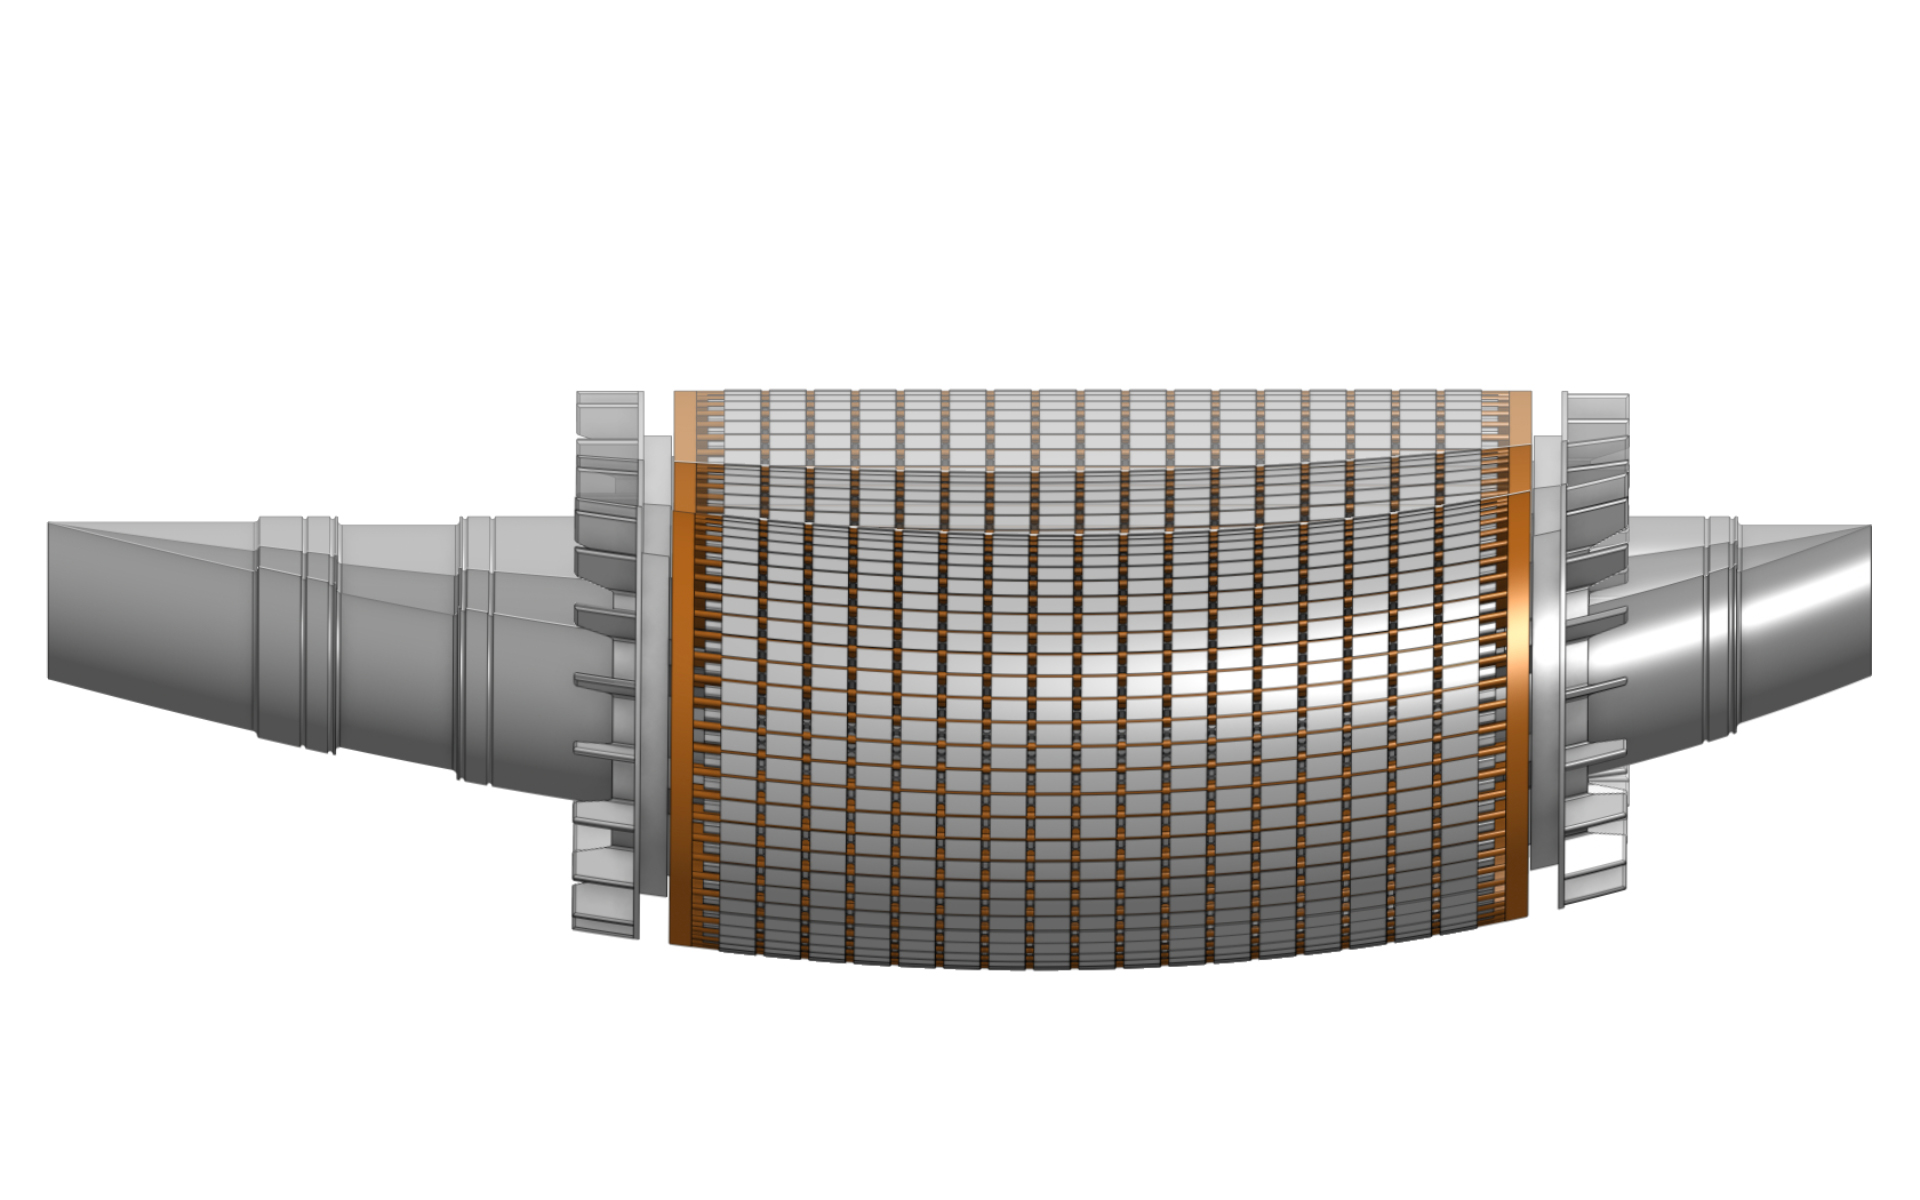 Image 2: Lateral bending of motor rotor